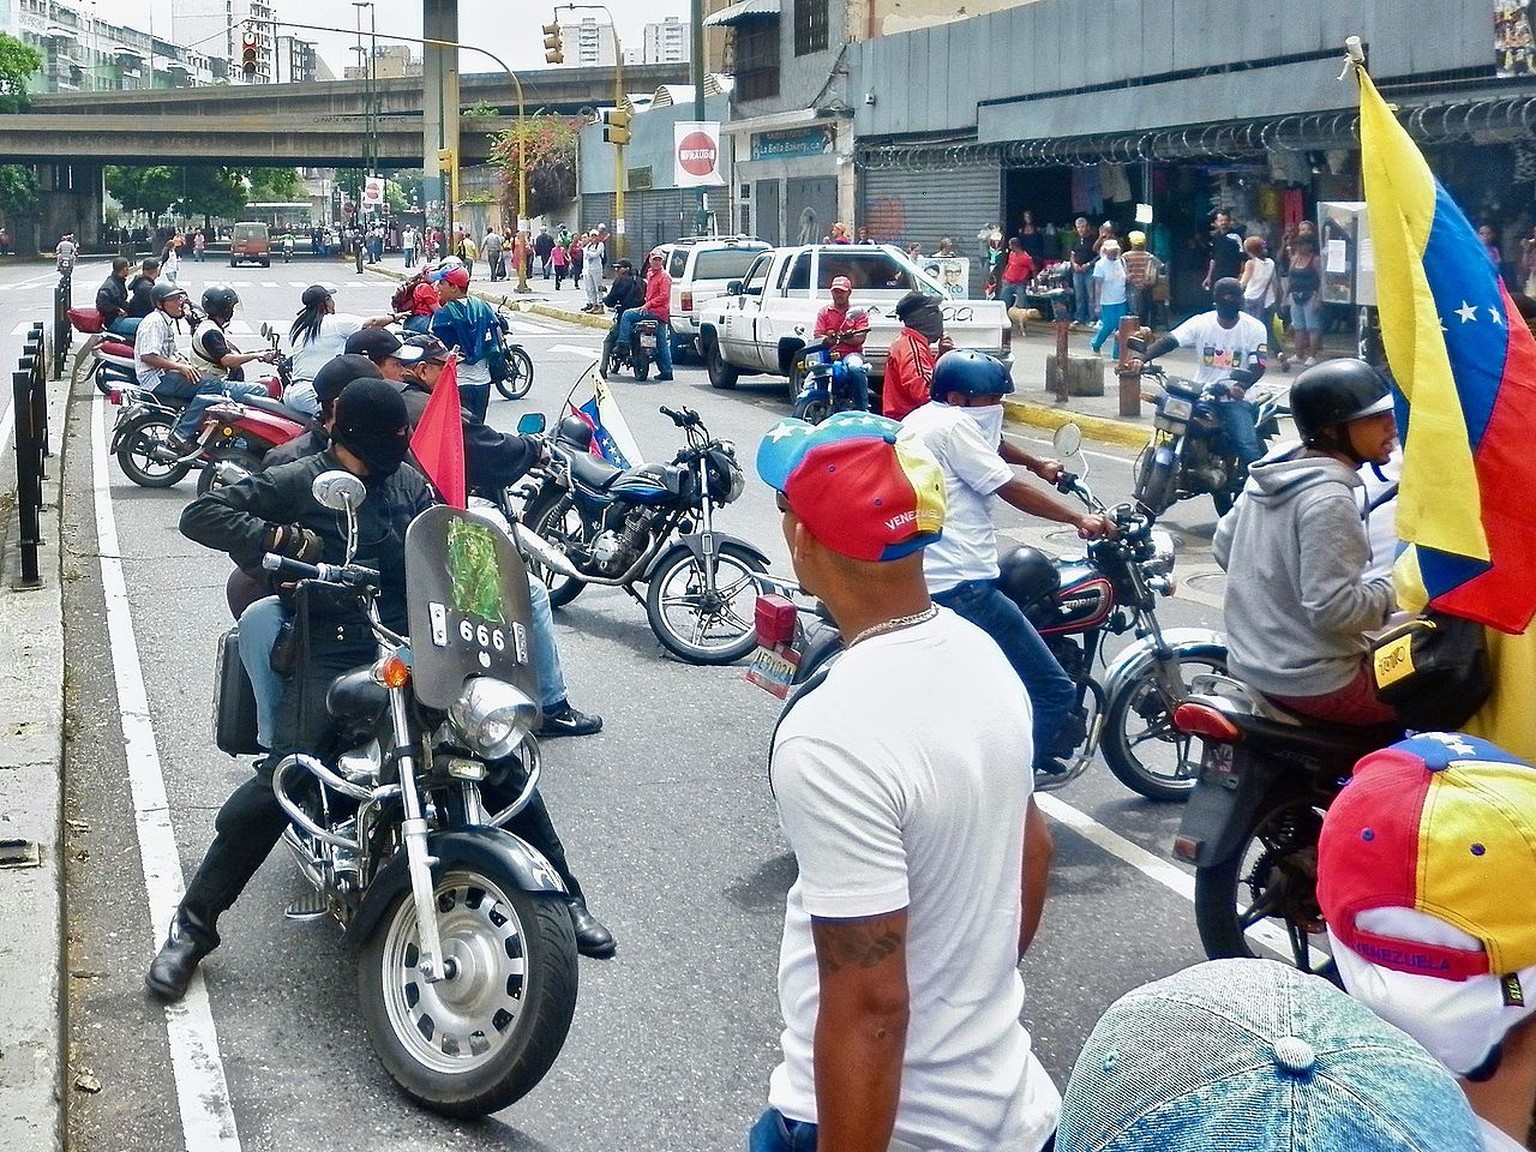 Pro-government colectivos in San Martín, Caracas, Venezuela block the passage of protests during the Mother of All Marches.
CC BY-SA 4.0, https://commons.wikimedia.org/w/index.php?curid=59814962